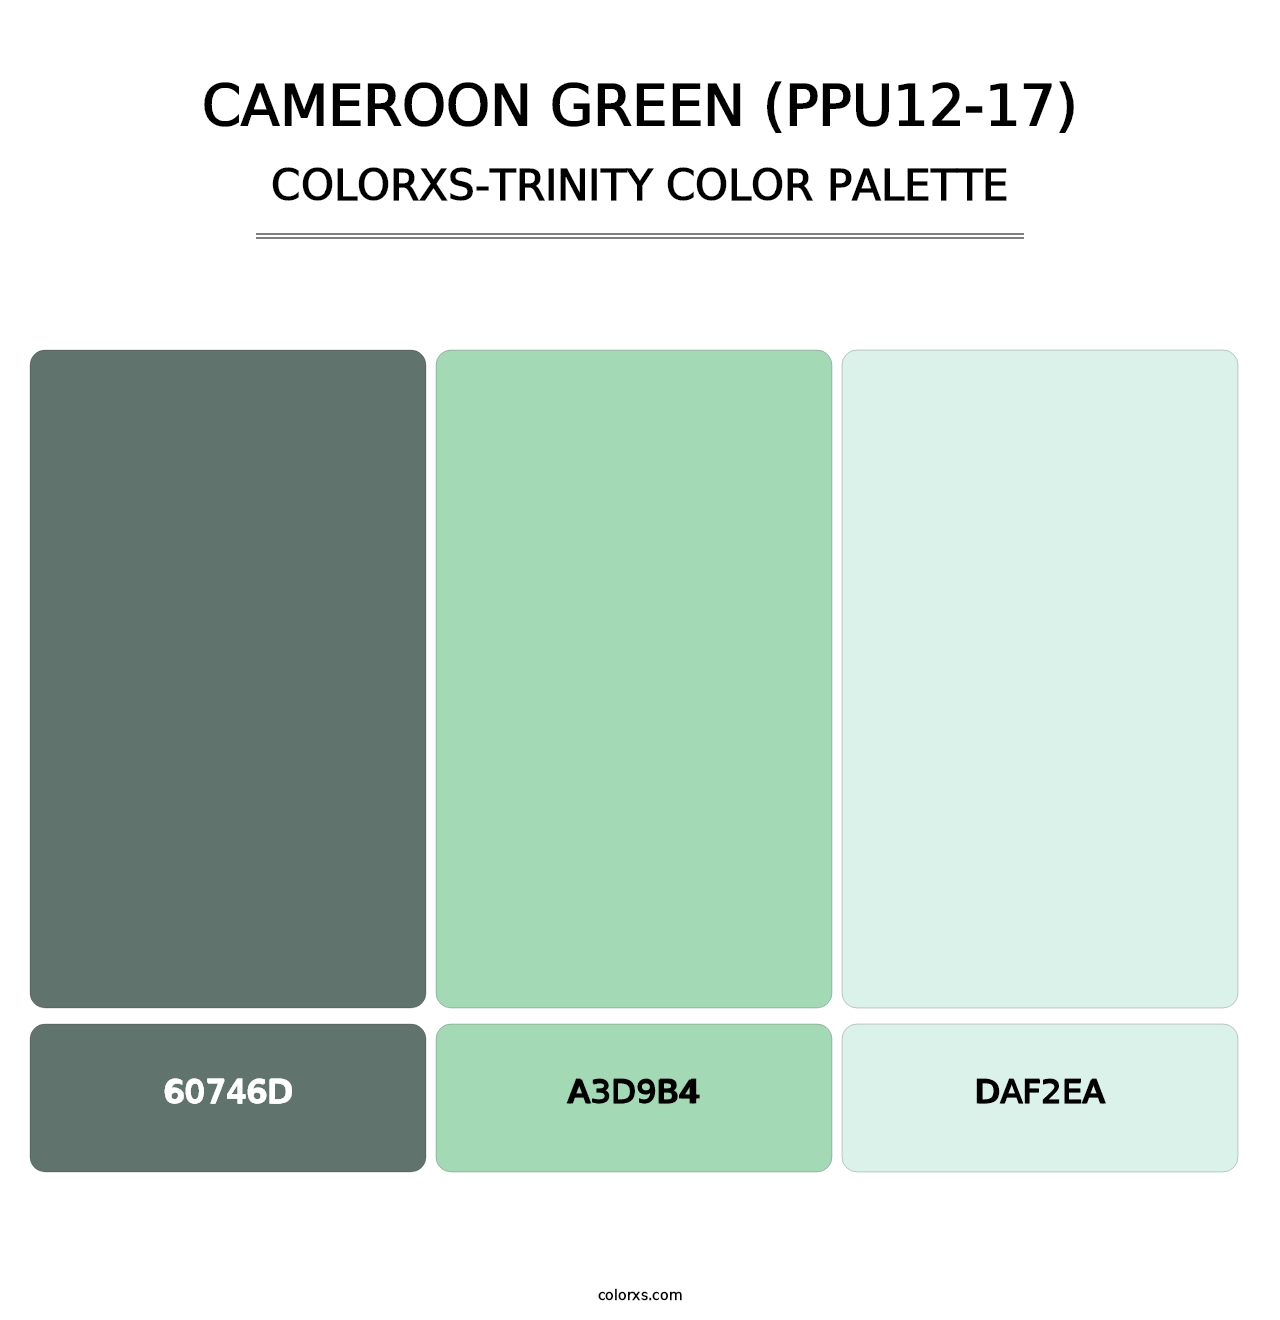 Cameroon Green (PPU12-17) - Colorxs Trinity Palette